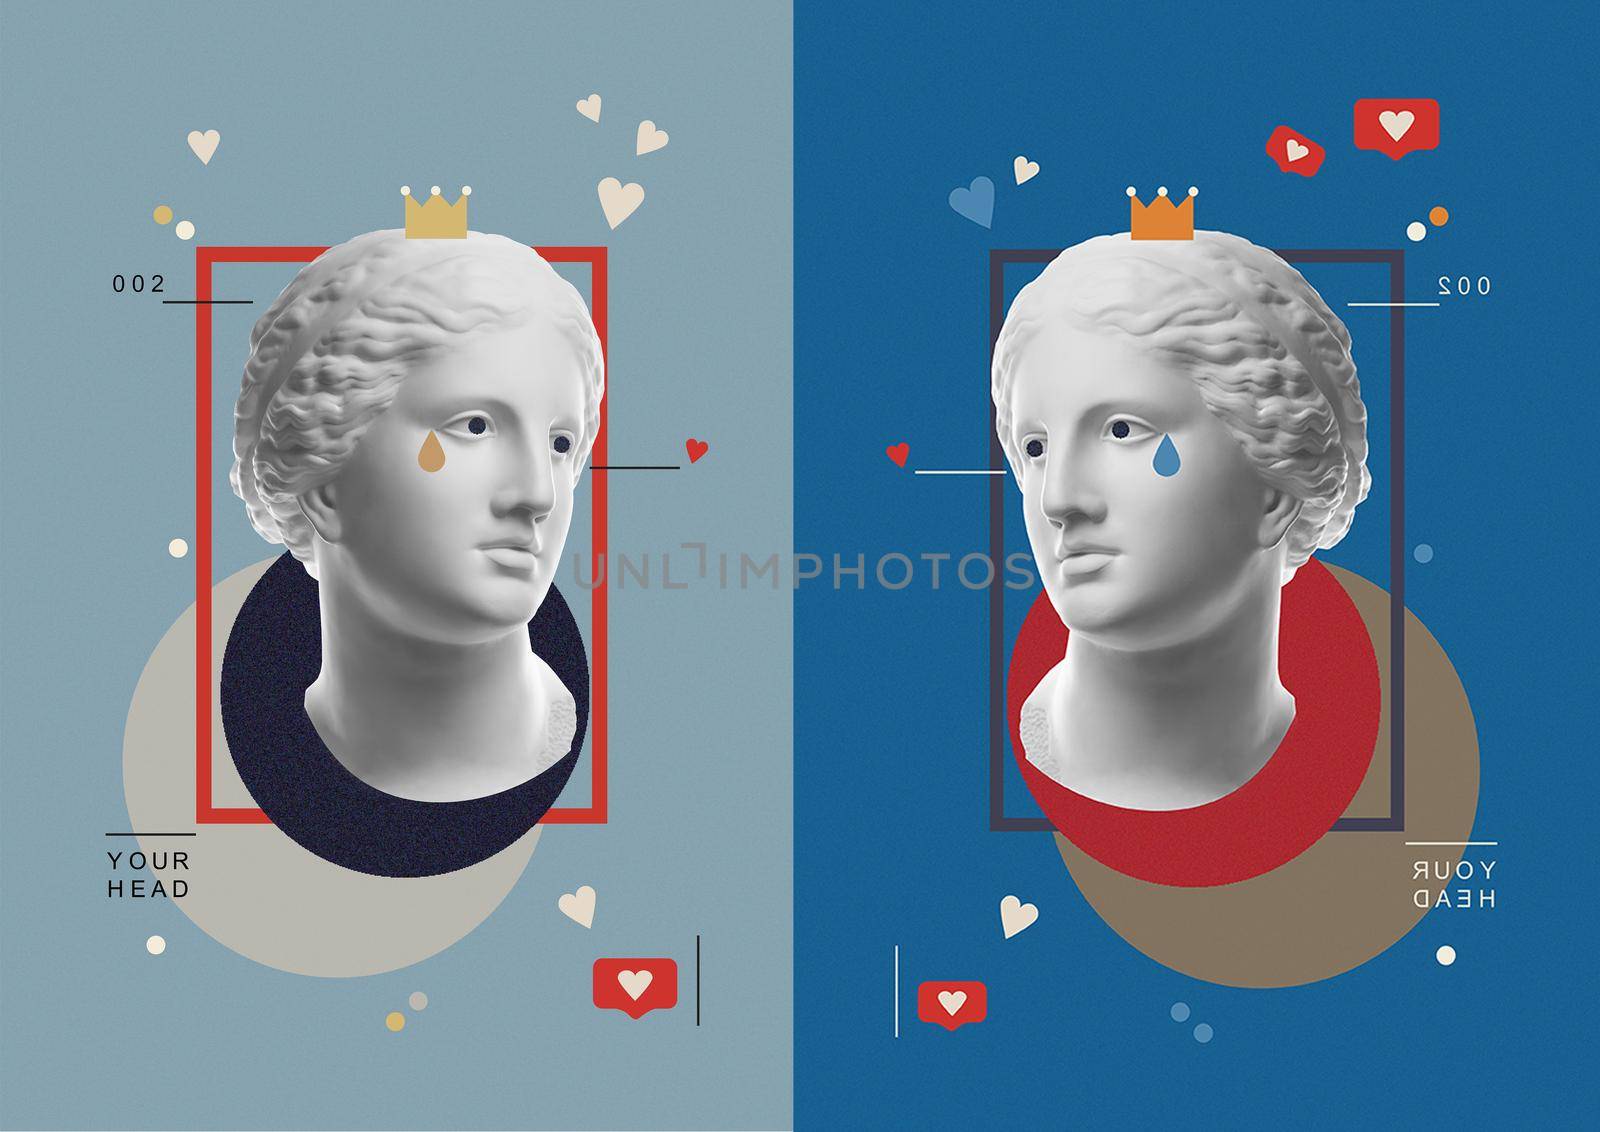 Fashion art collage with plaster antique sculpture of Venus face in a pop art style. Beauty, fashion and health theme. Creative vogue concept image in contemporary surrealism style. Zine culture.